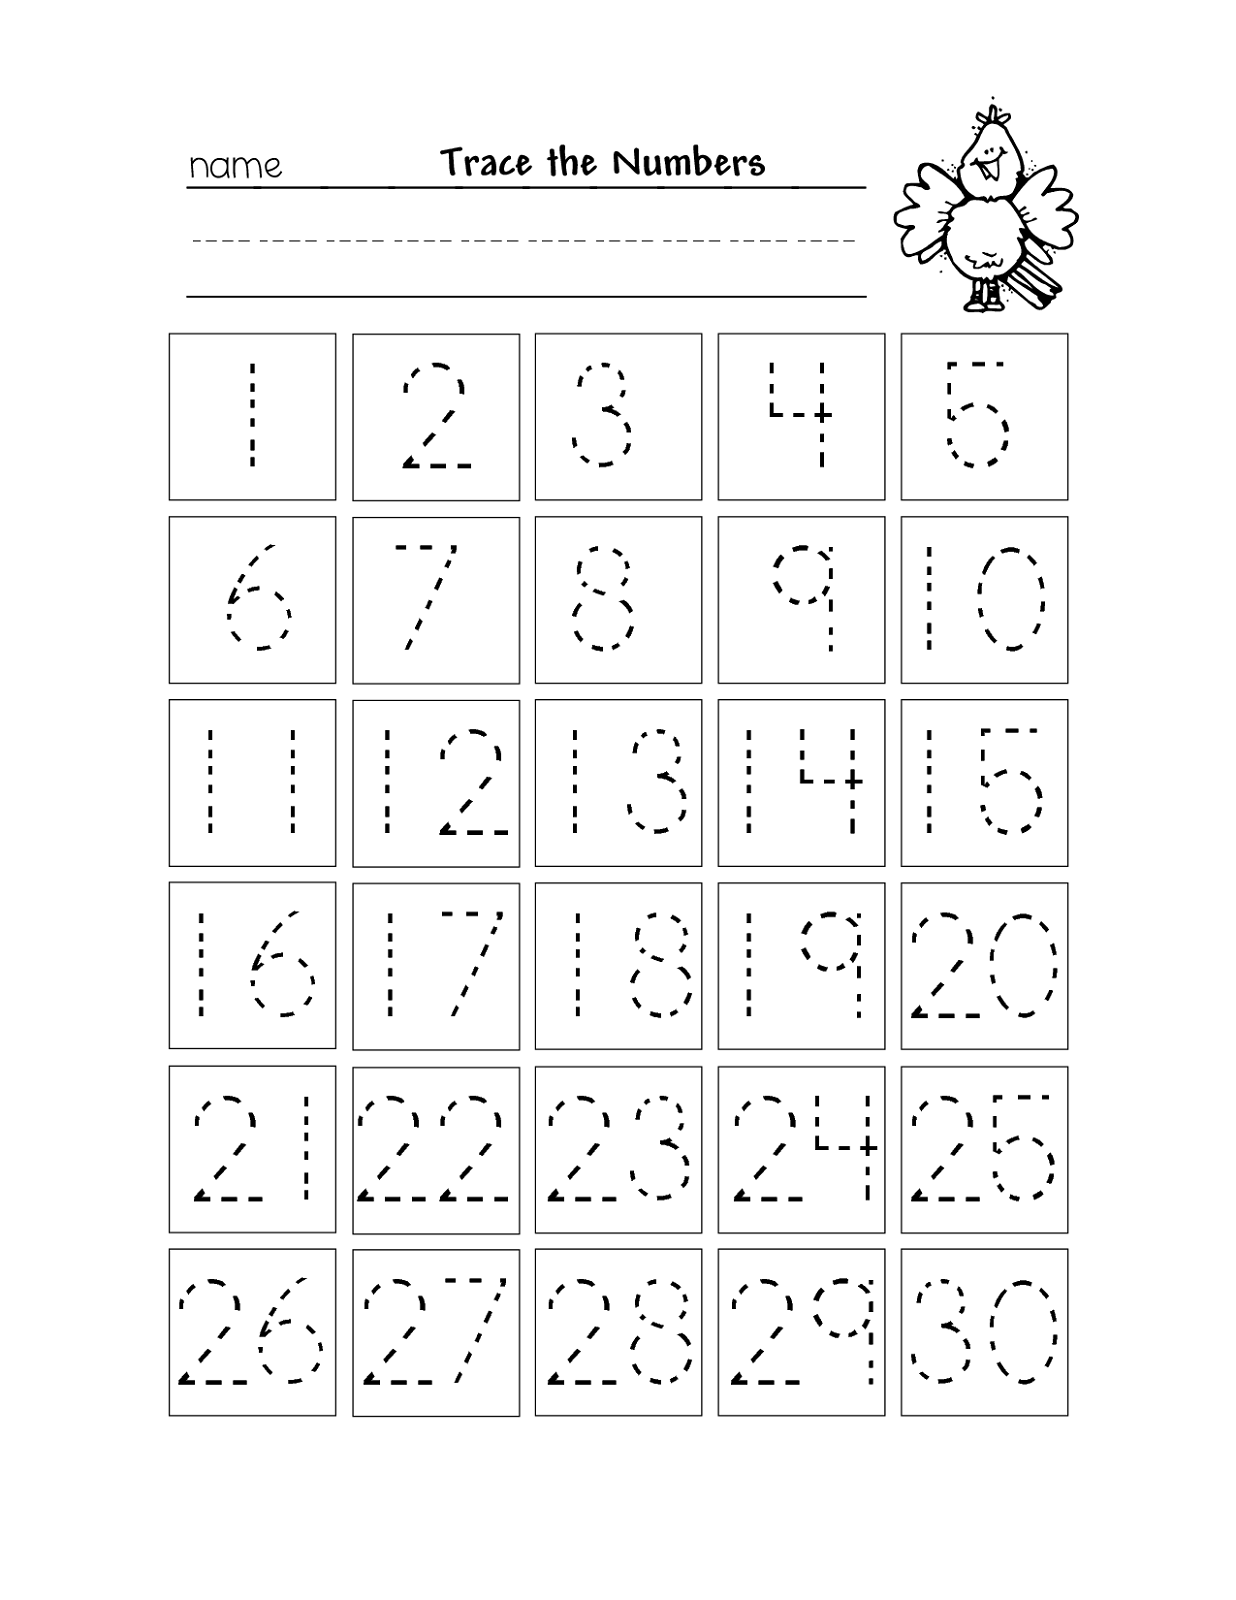 Free Printable Number Chart 1-30 | Activity Shelter